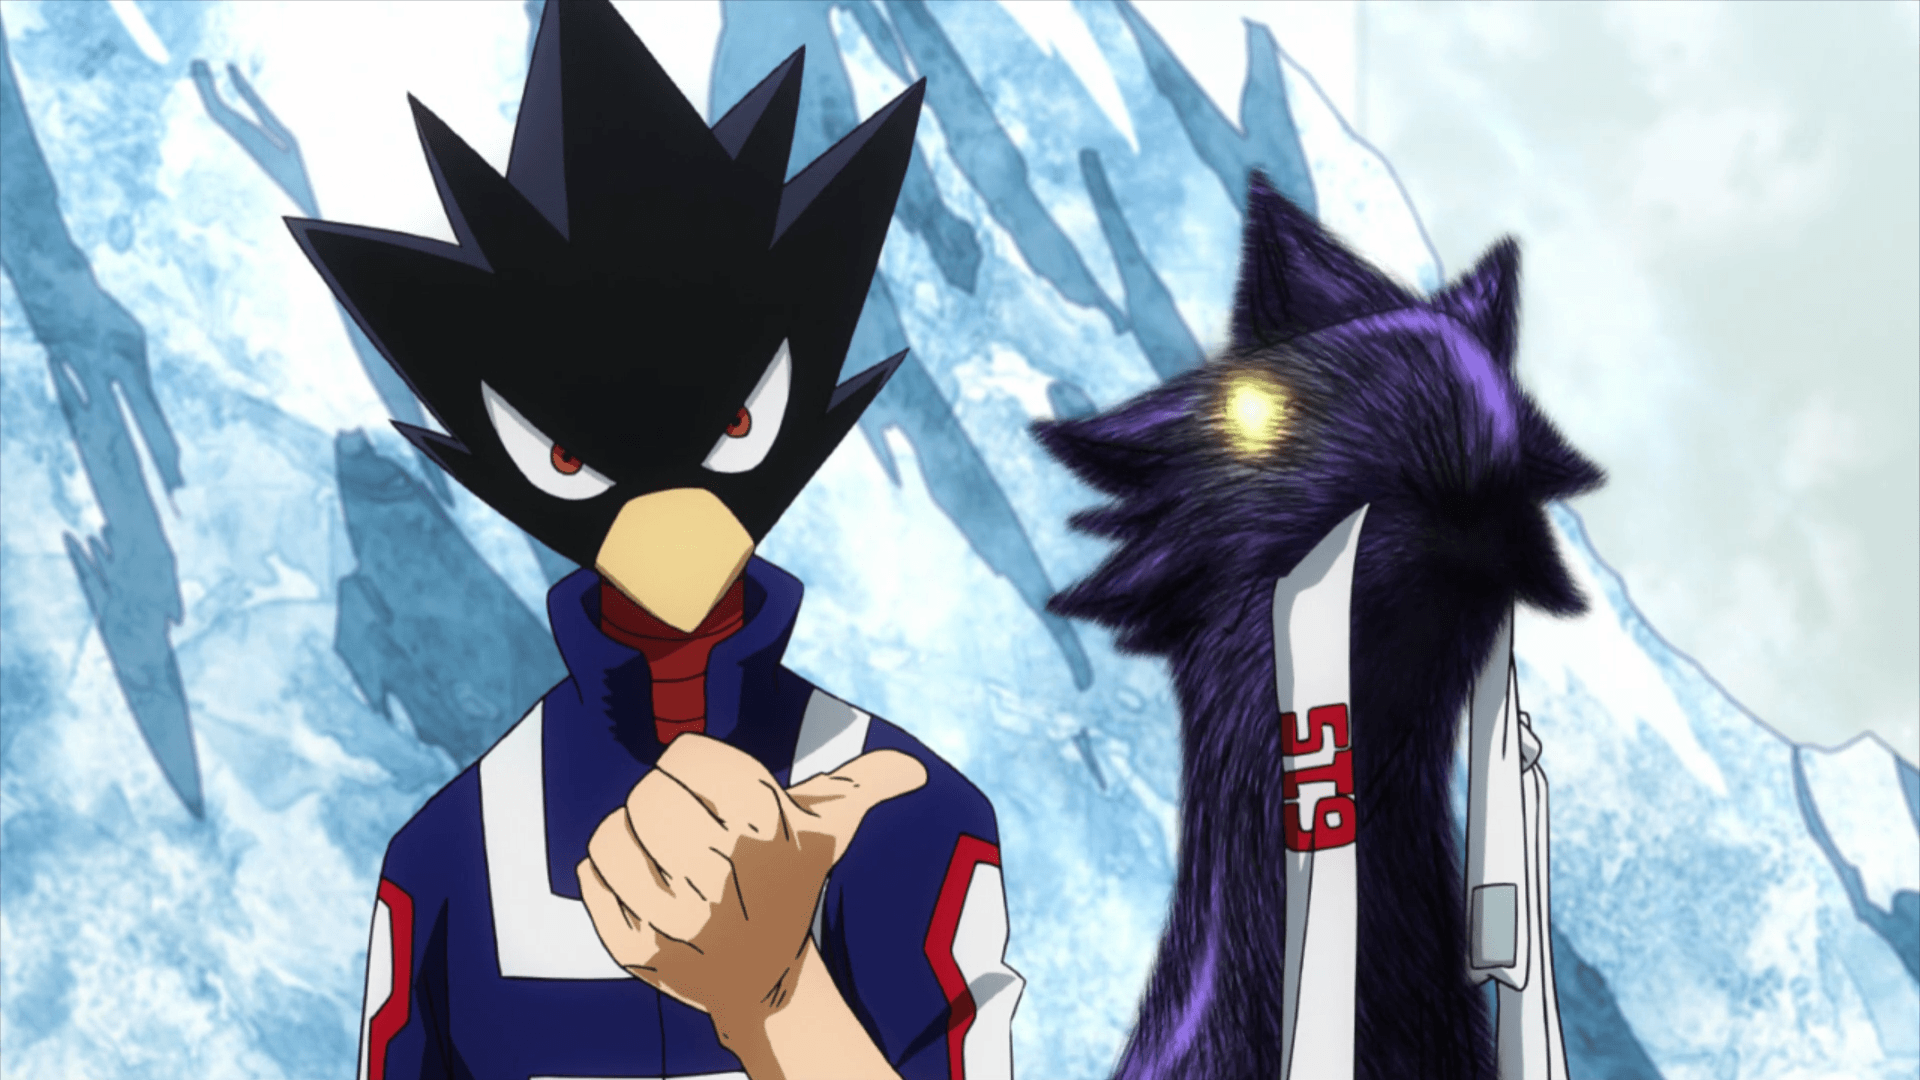 My Hero Academia: One's Justice Adds 3 New Playable Characters